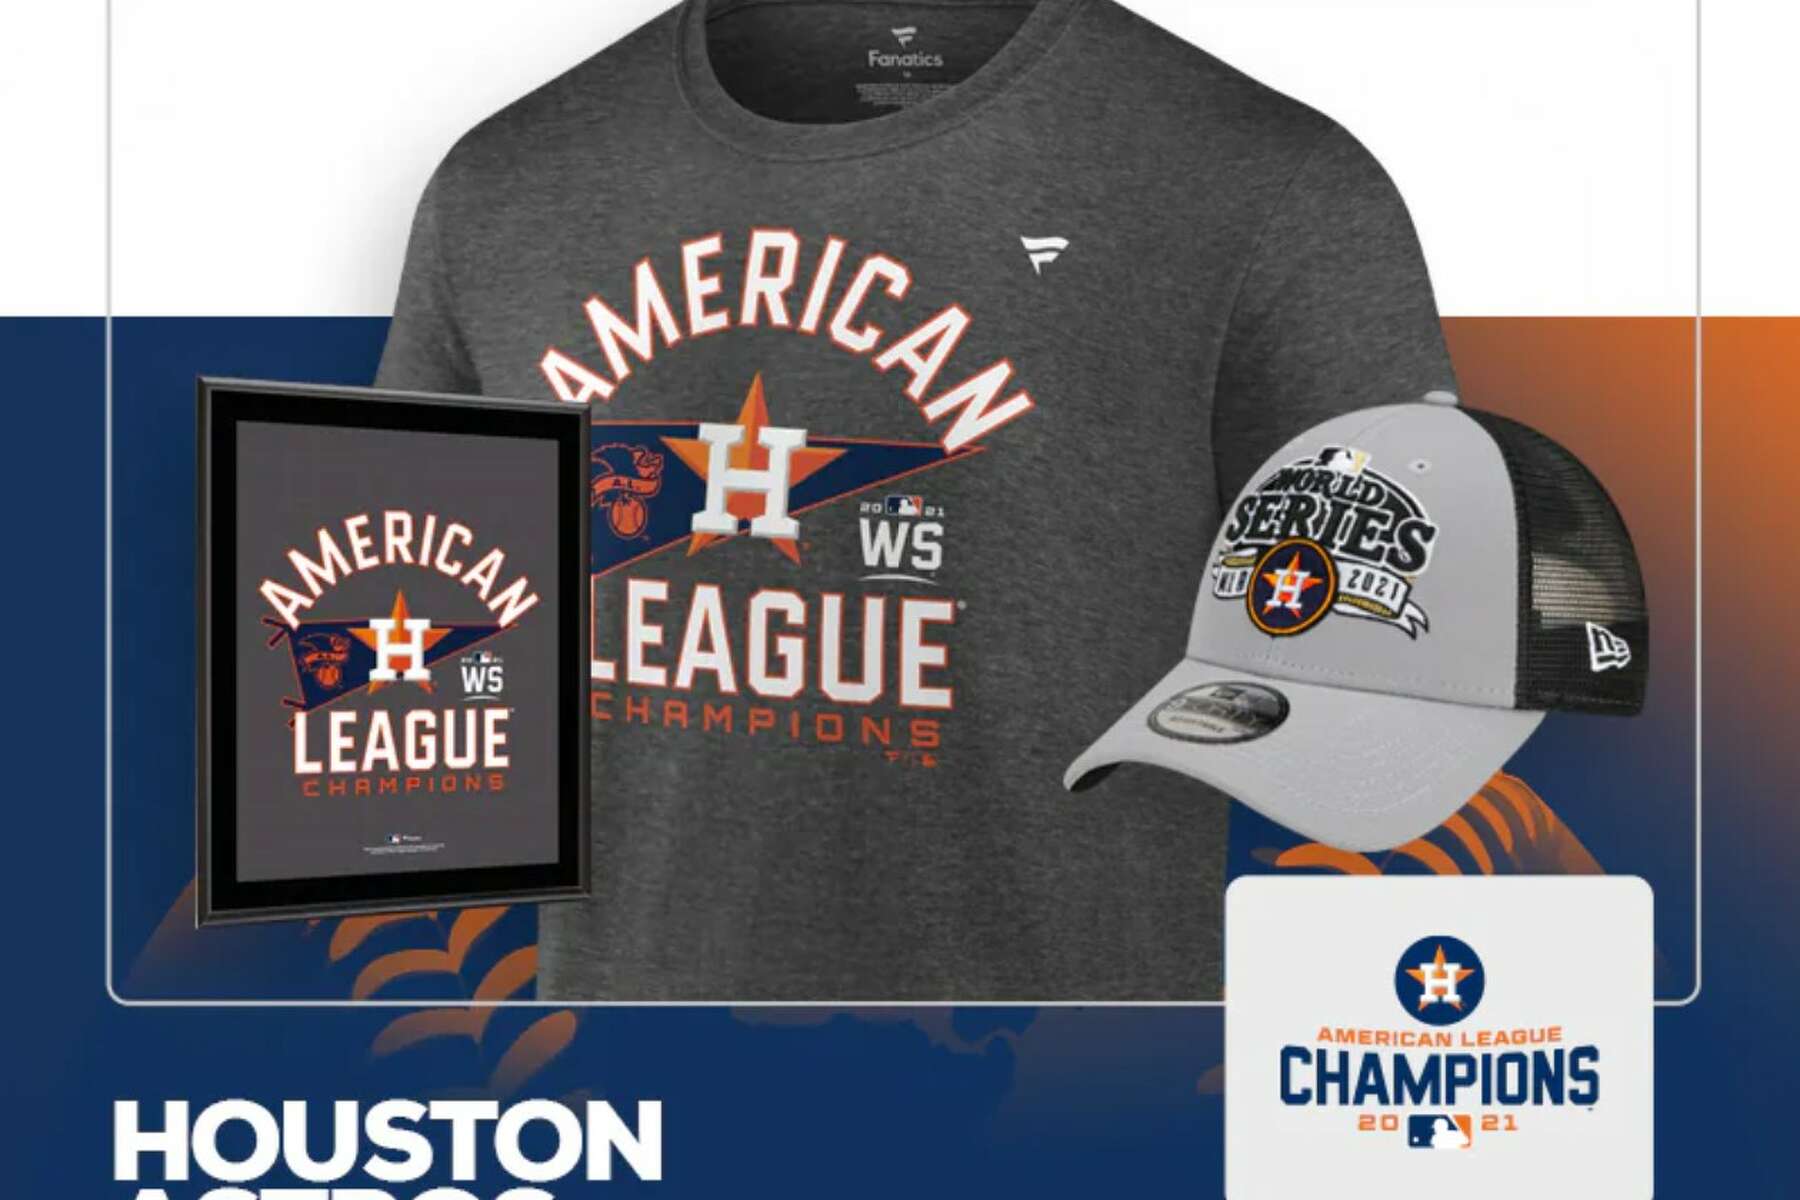 To Commemorate their 2021 American League Championship the Houston